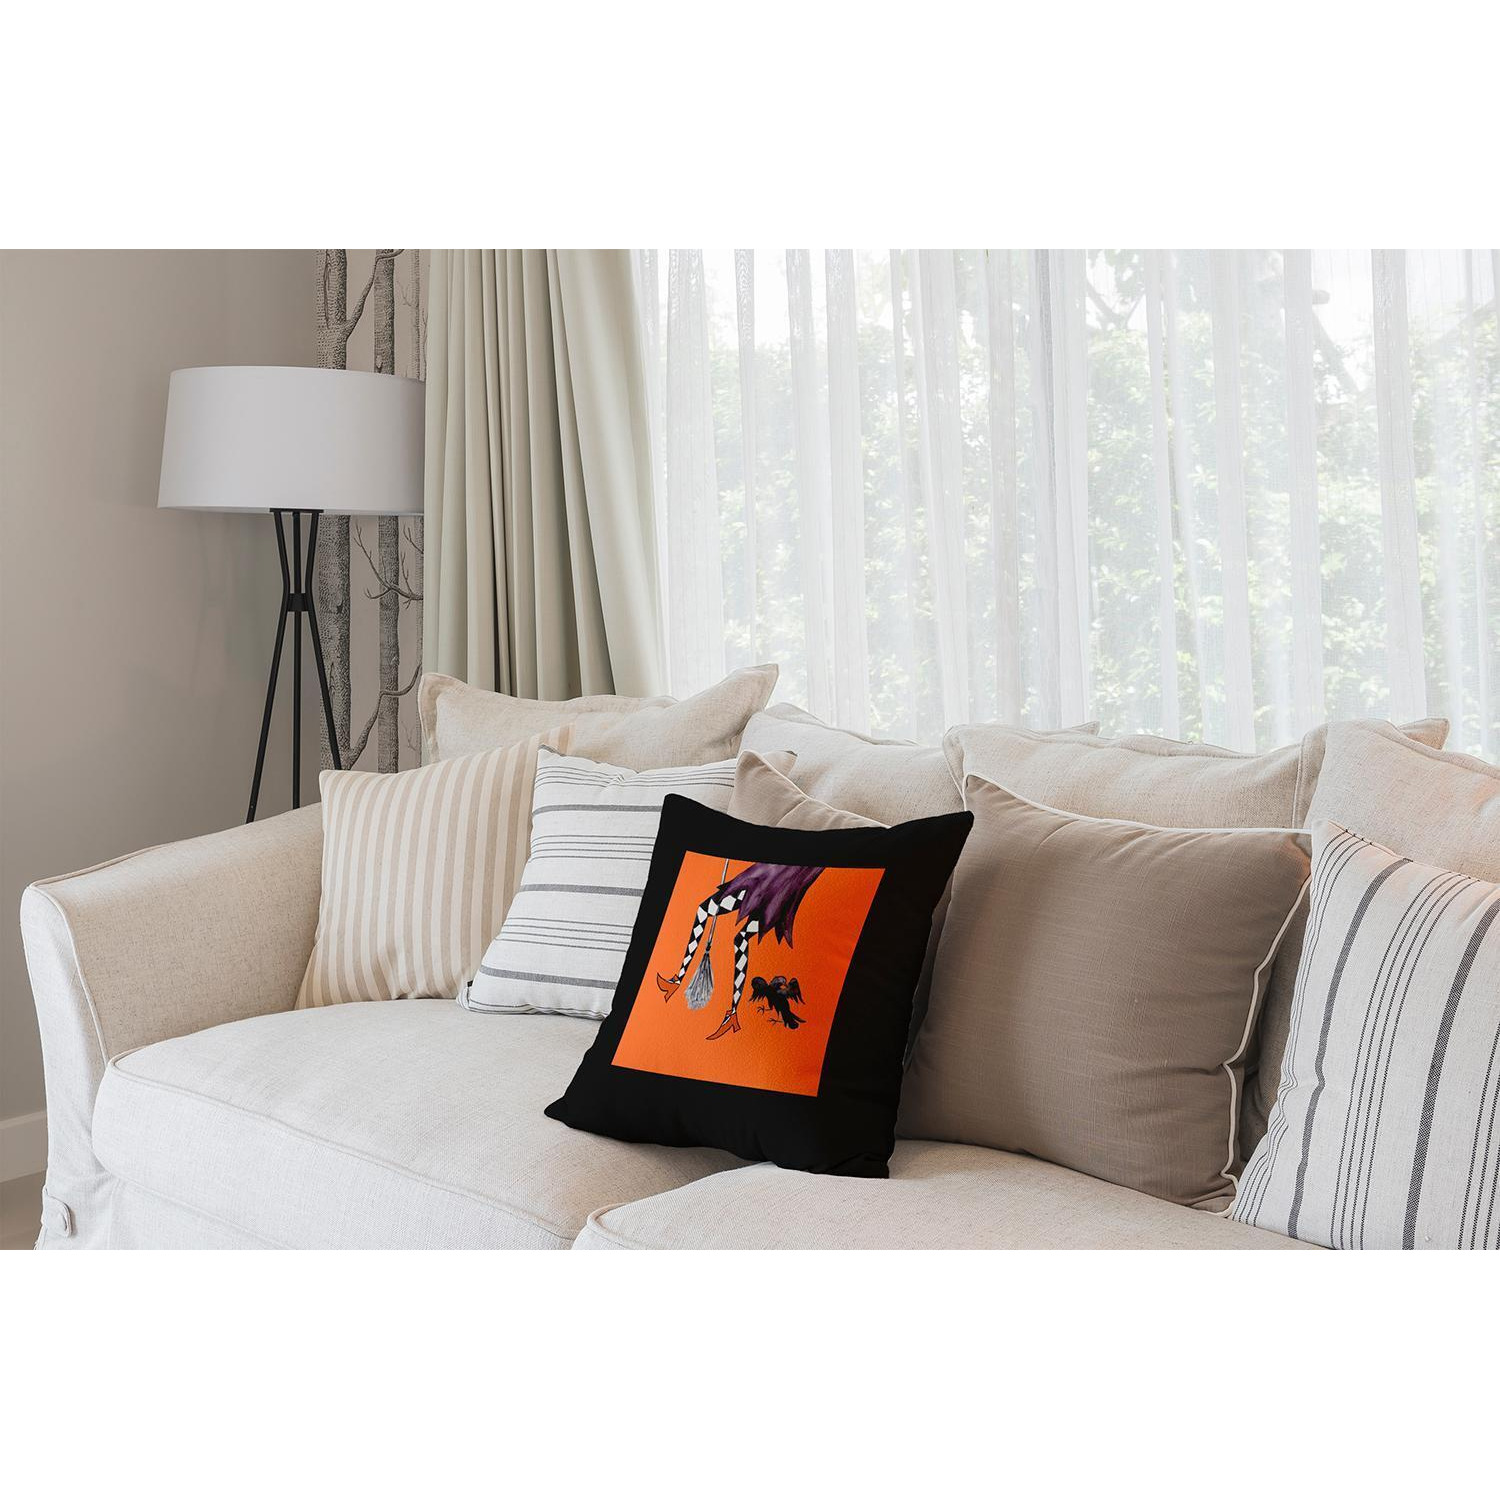 16" x 16" Black and Orange Fly Away Witch Halloween Throw Pillow alternate image